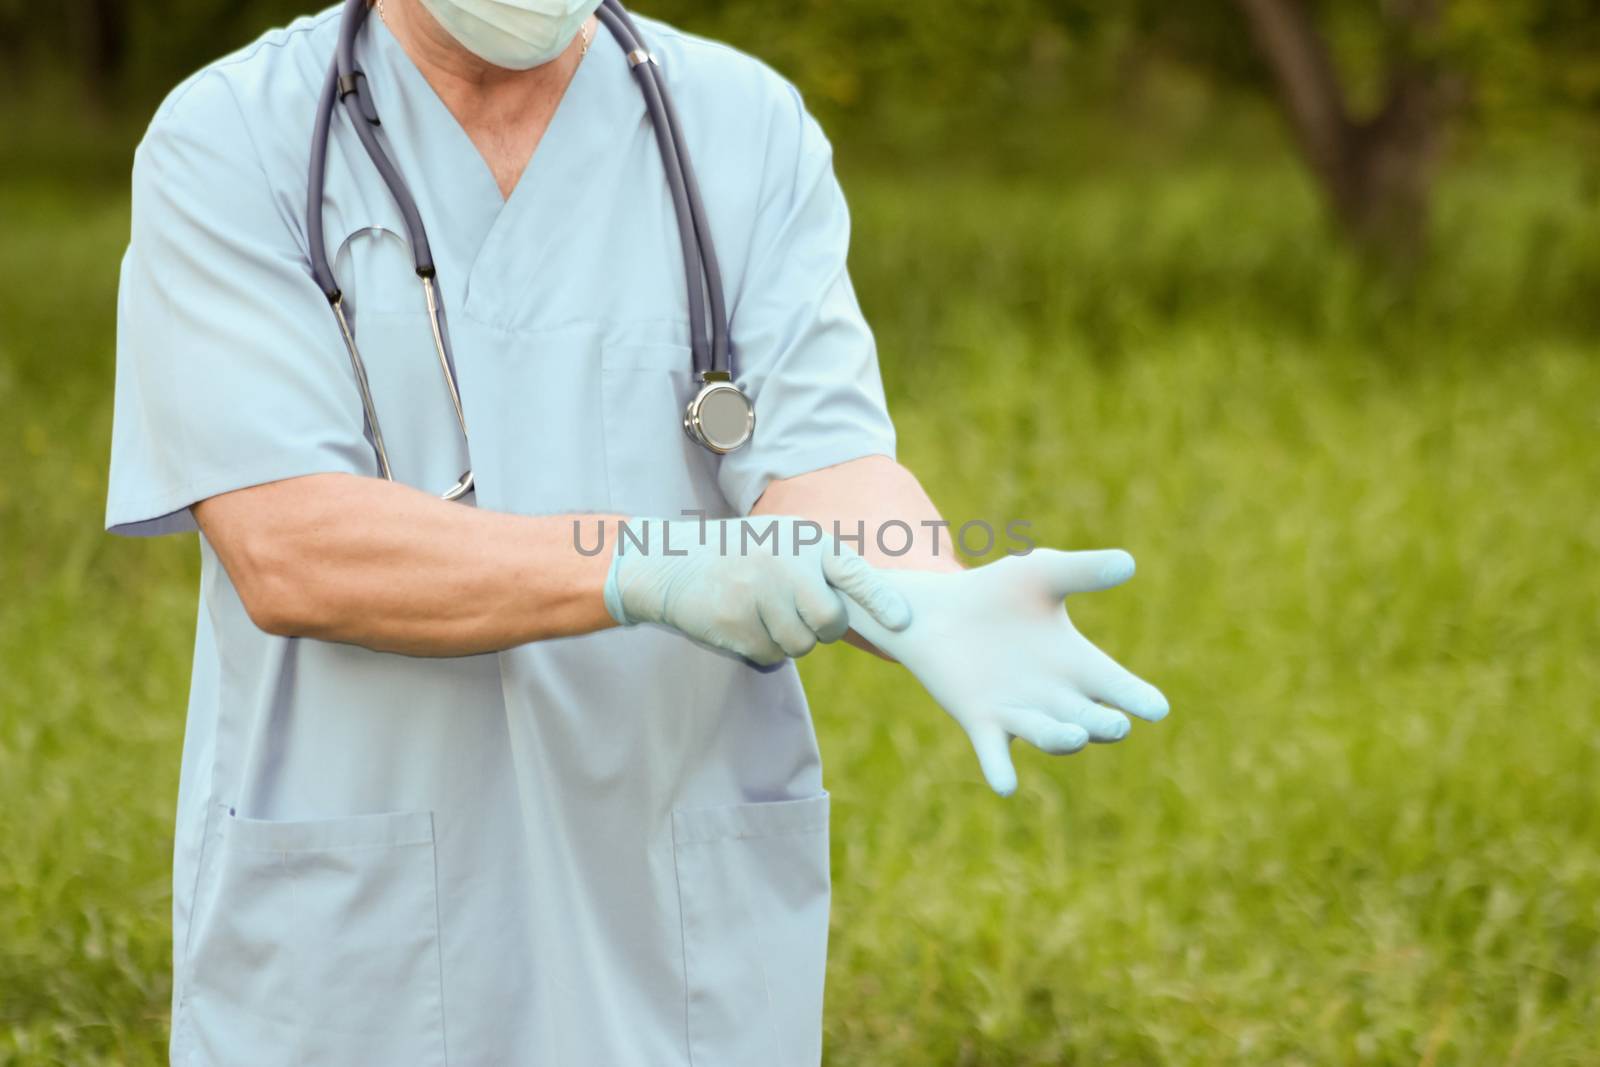 Doctor concept treatment nature. The doctor wears a glove on his arm. Photo horizontal for your design.